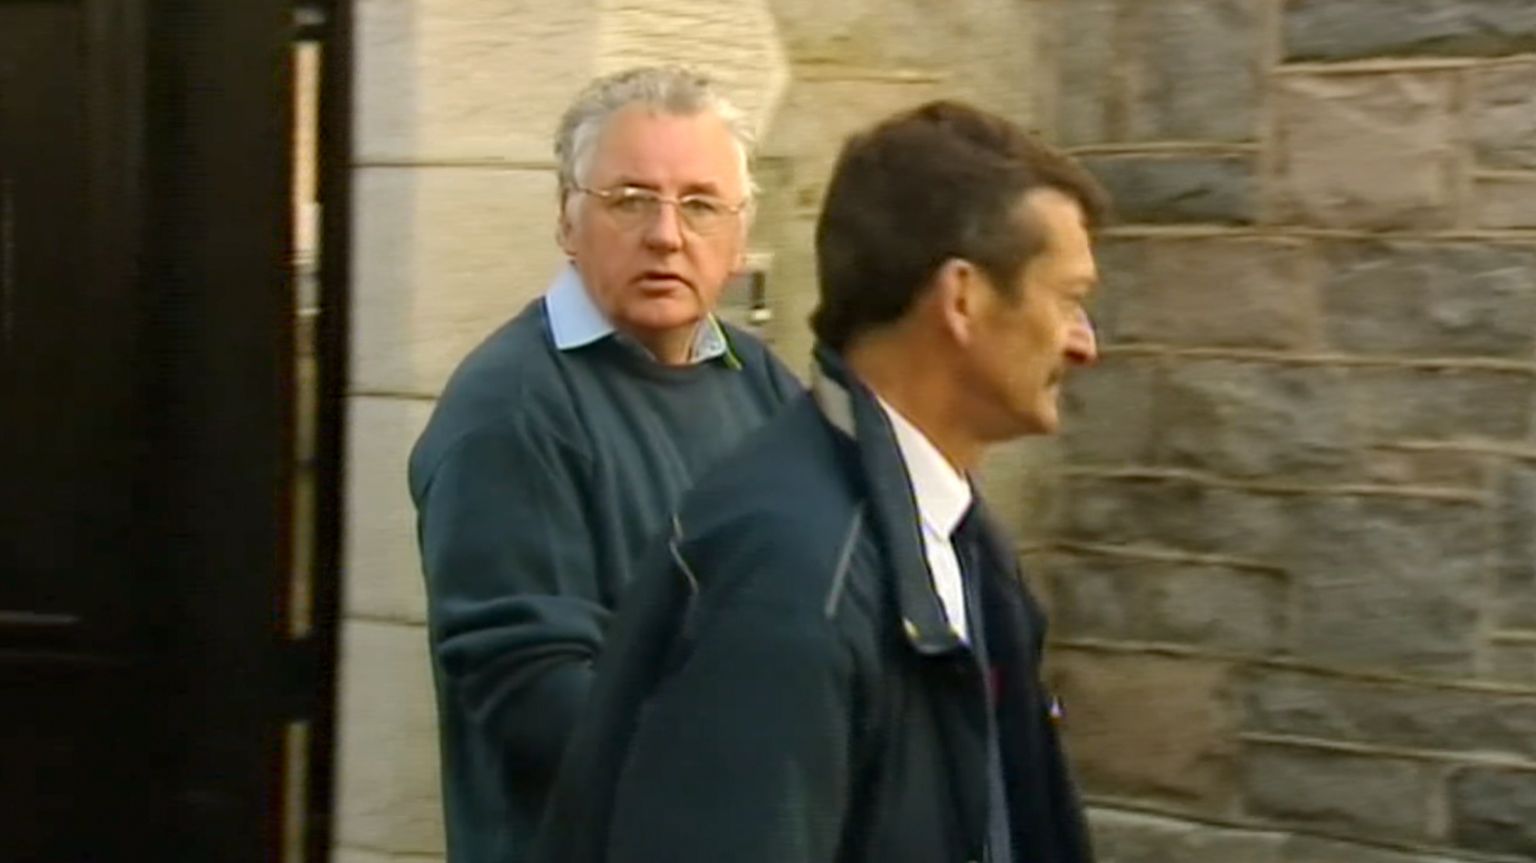 Noel Thomas wearing a blue sweater and blue shirt is led away by a security officer at the old Caernarfon Crown Court